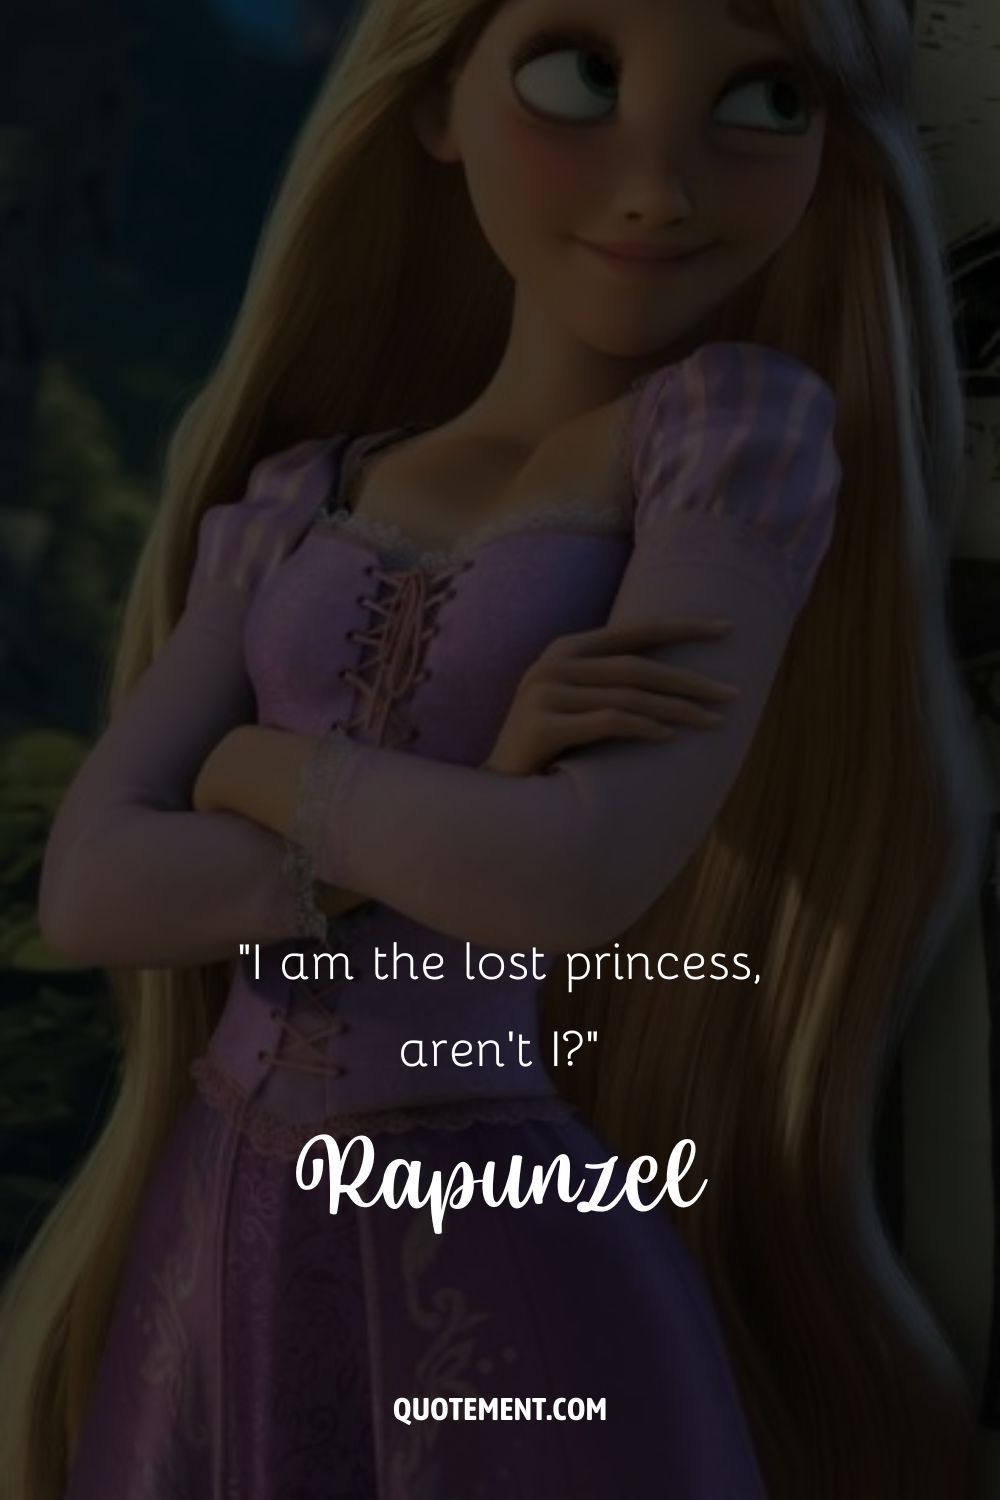 cute doll cartoon character representing quote from rapunzel